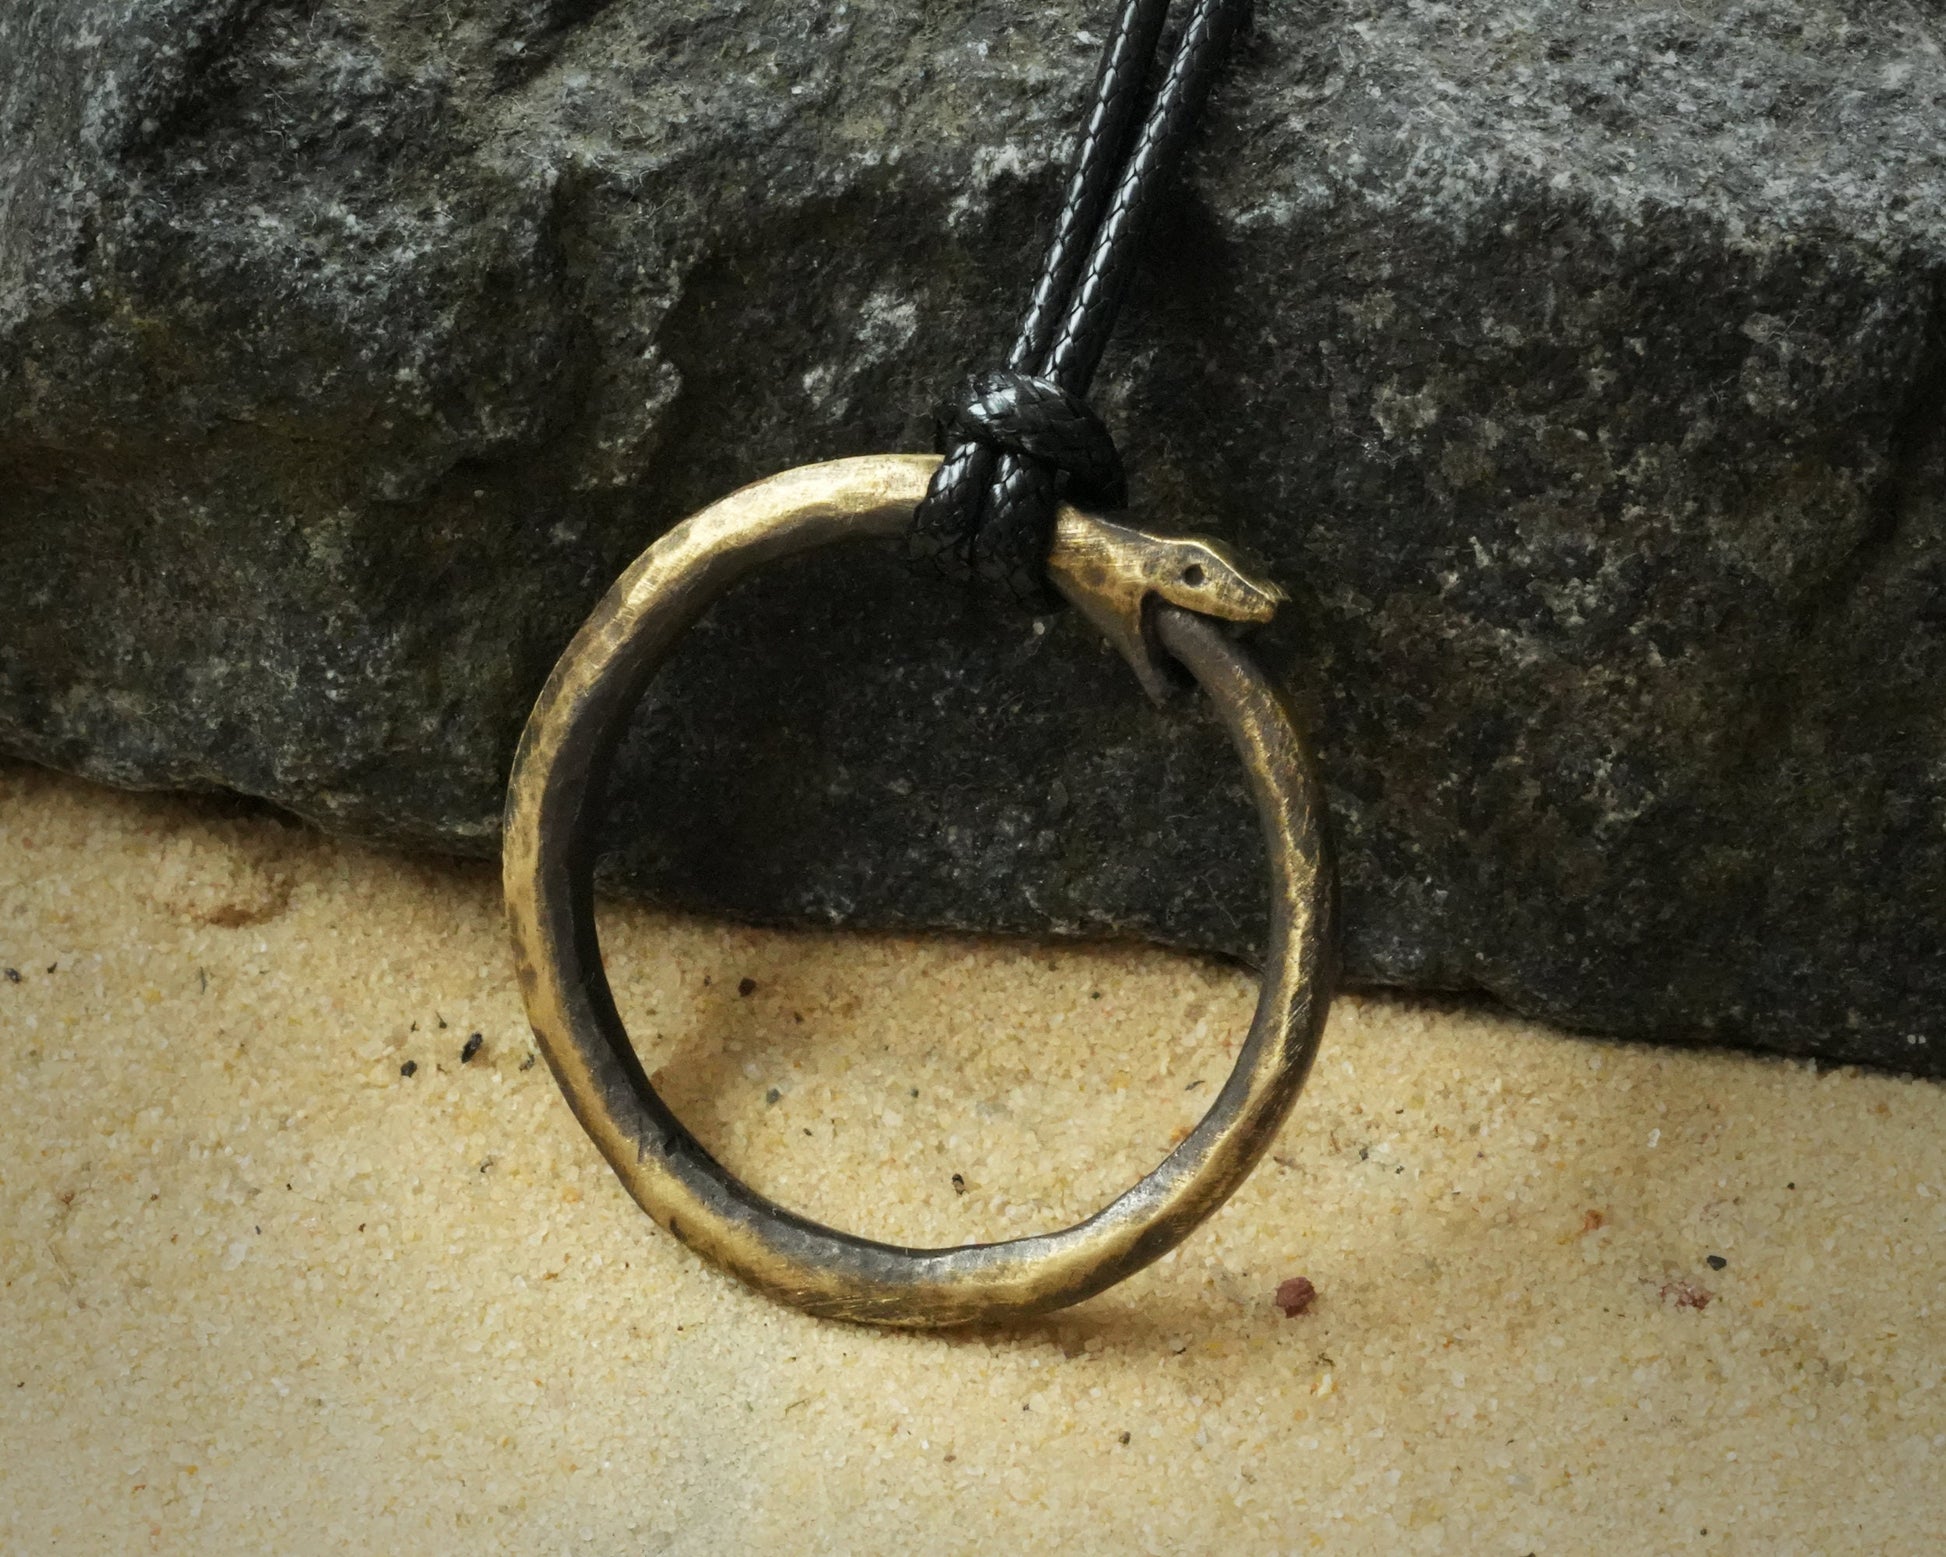 Ouroboros Snake Viper Ring Necklace Pendant Charm 925 Sterling silver Brass - Baldur Jewelry